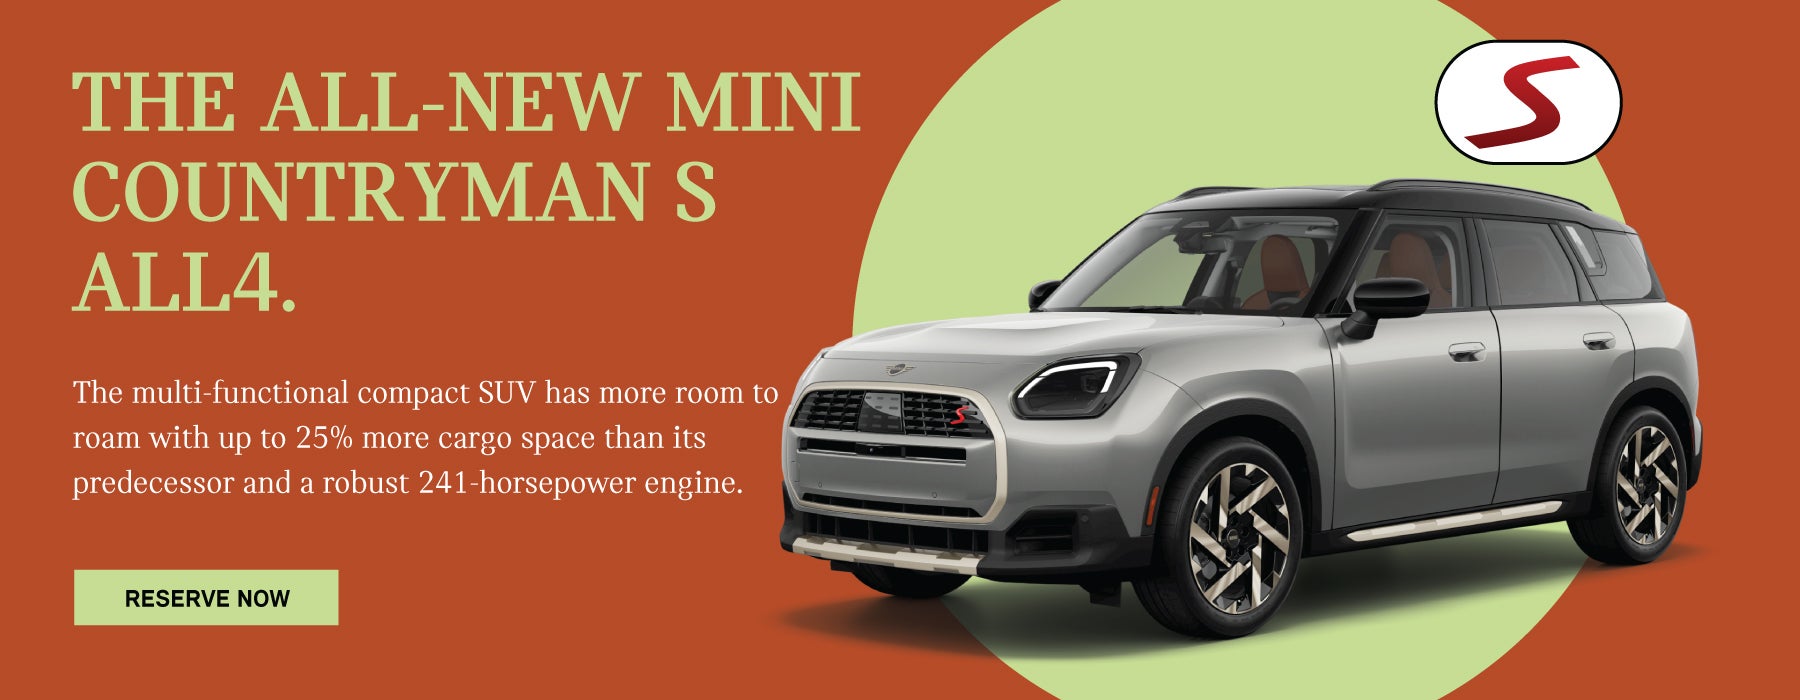 Pictured is a 3/4 driver side view of a mini countryman